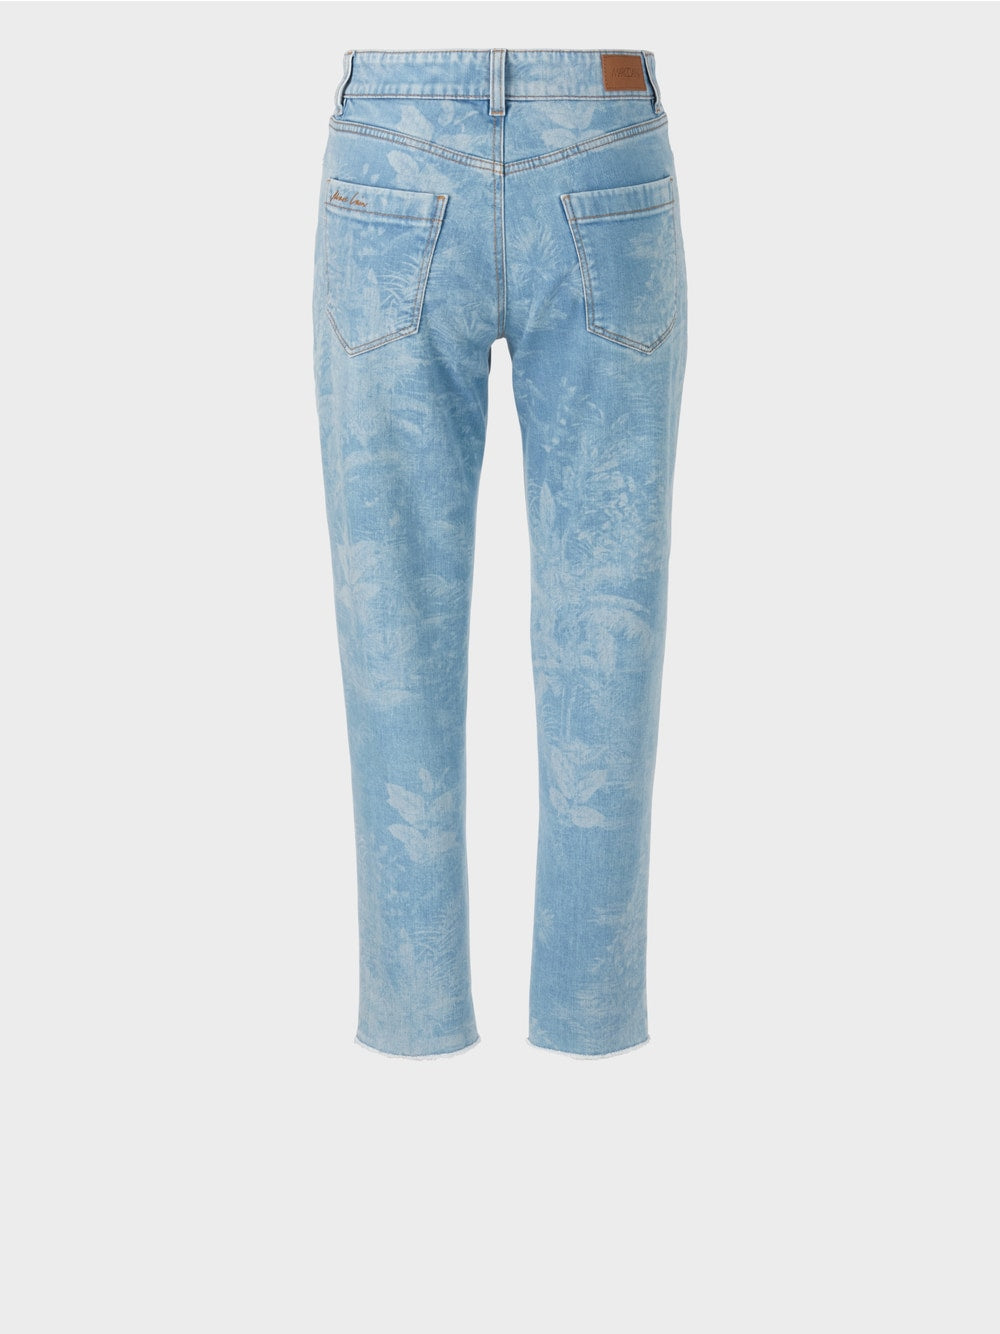 Marc Cain “Rethink Together” jeans with all over print